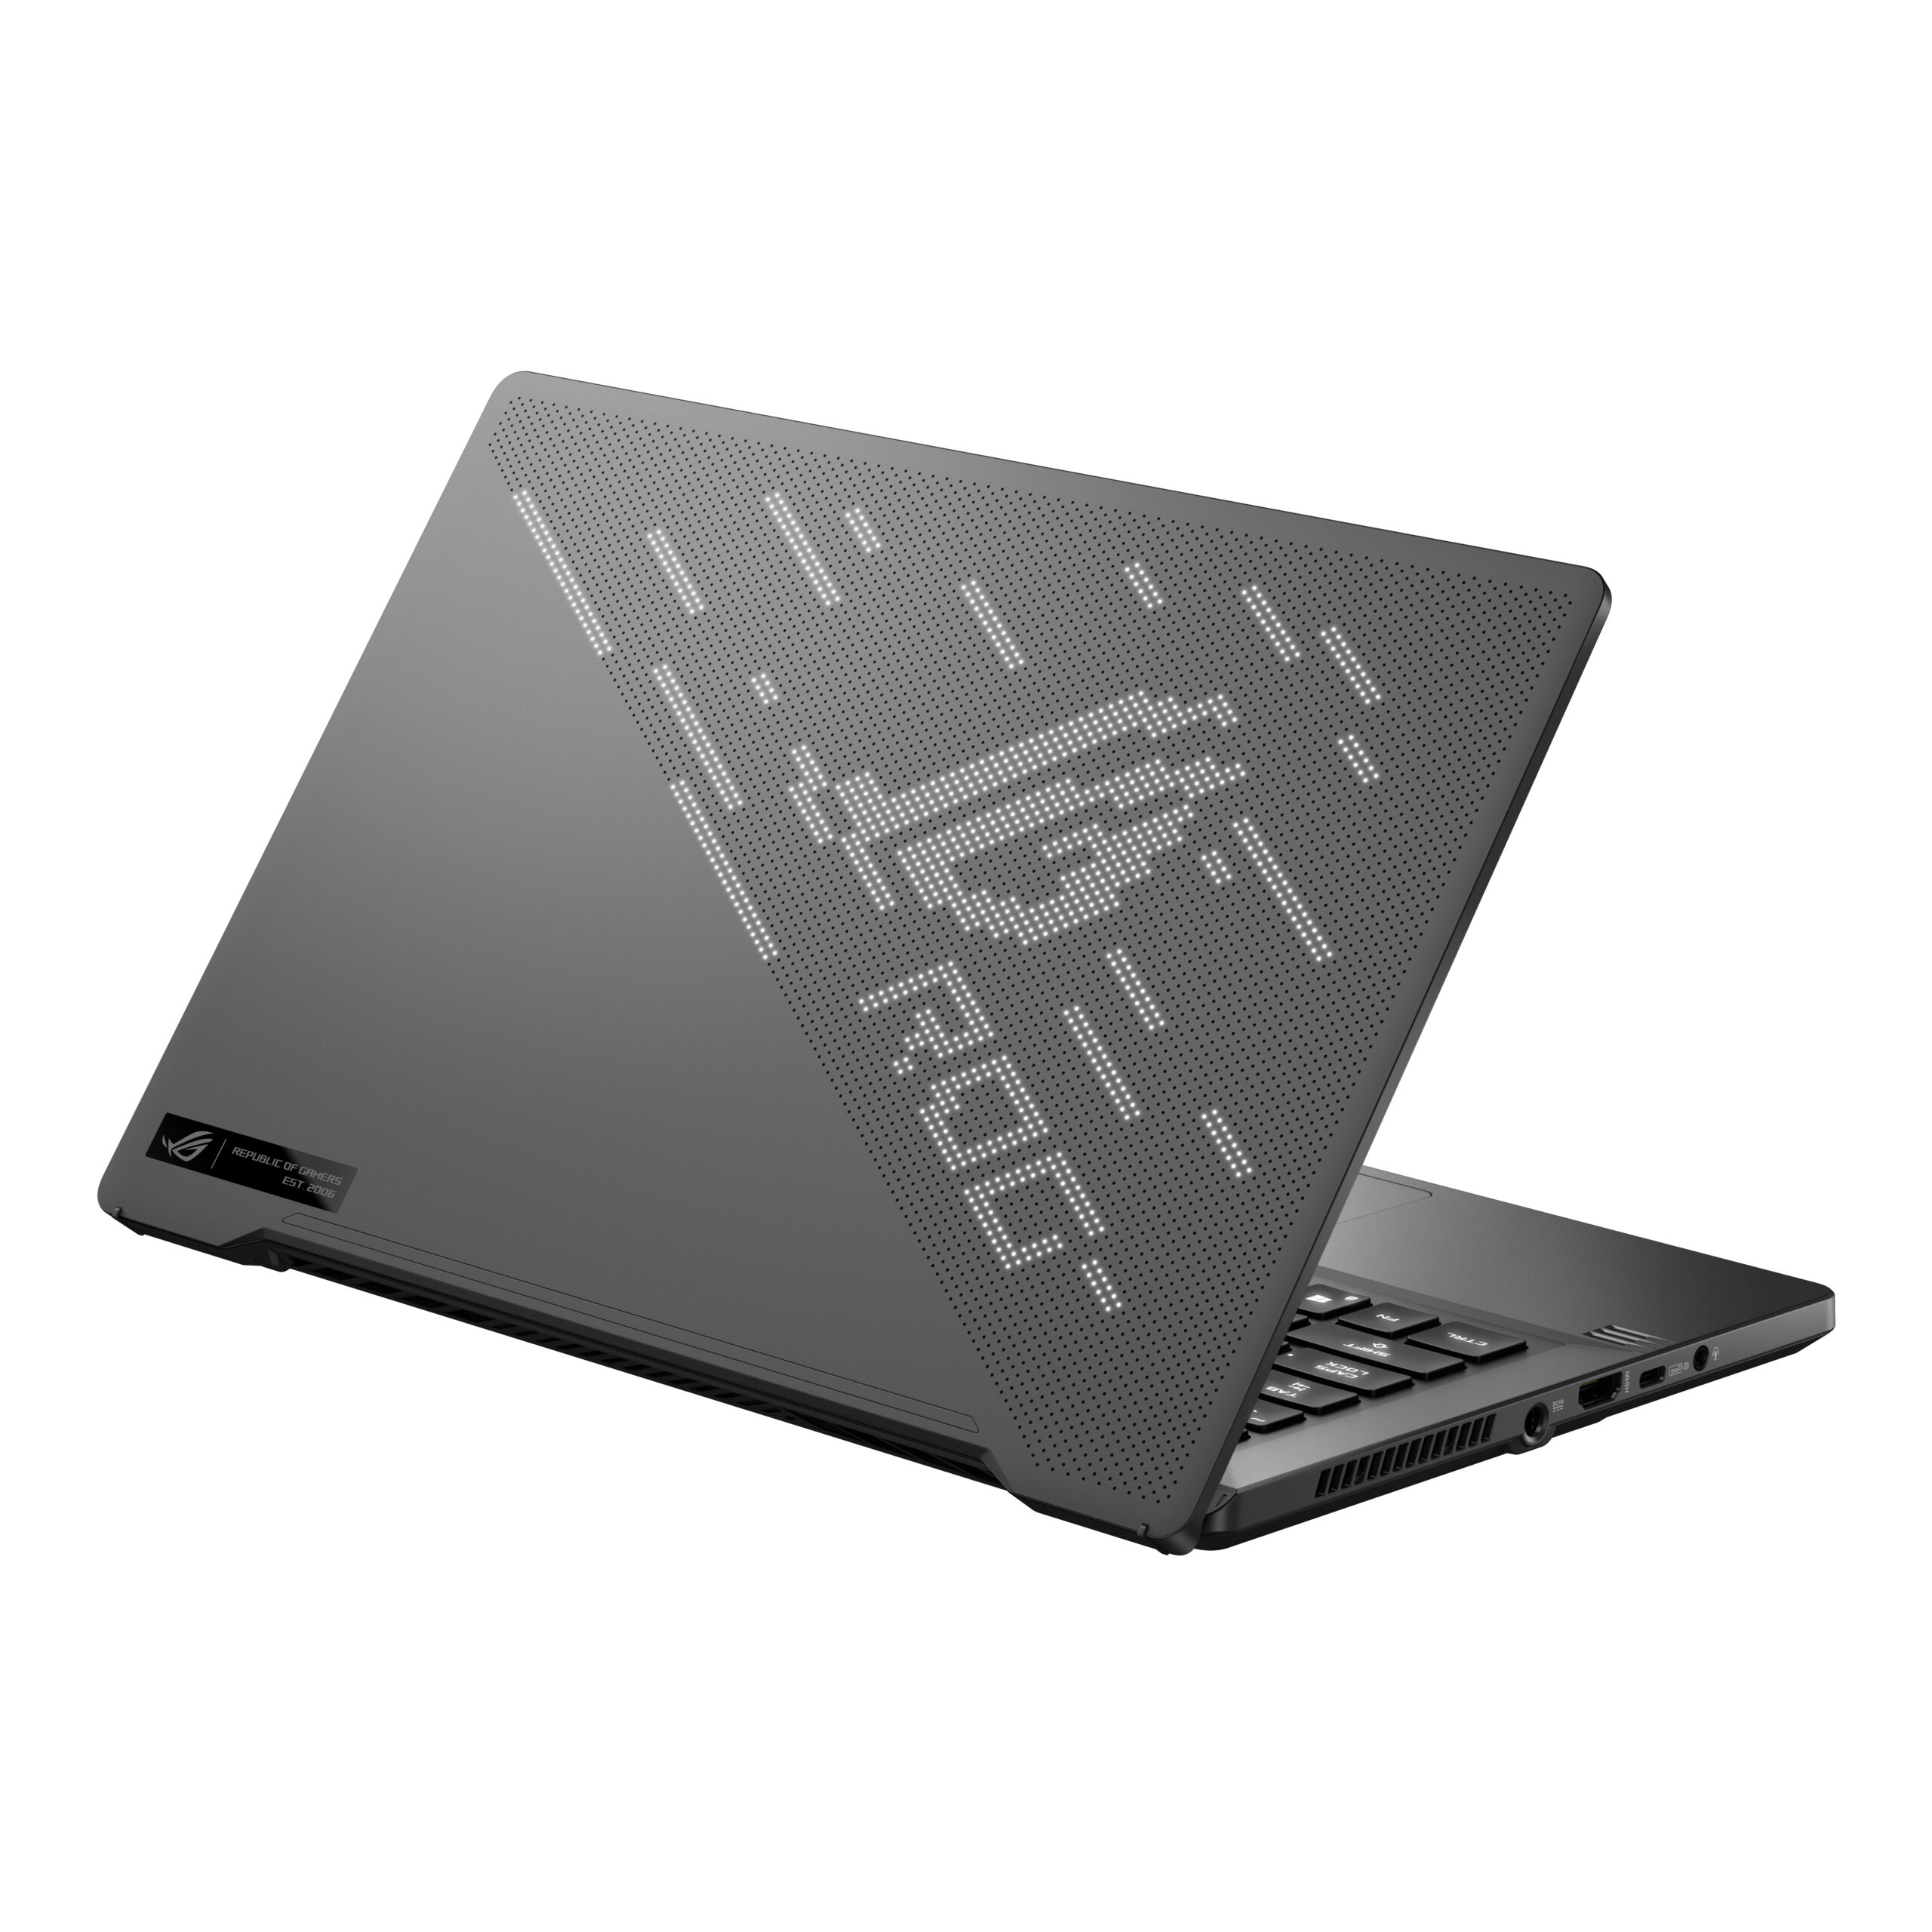 CES 2020: ASUS ROG Zephyrus G14 and G15 Gaming Laptop 25